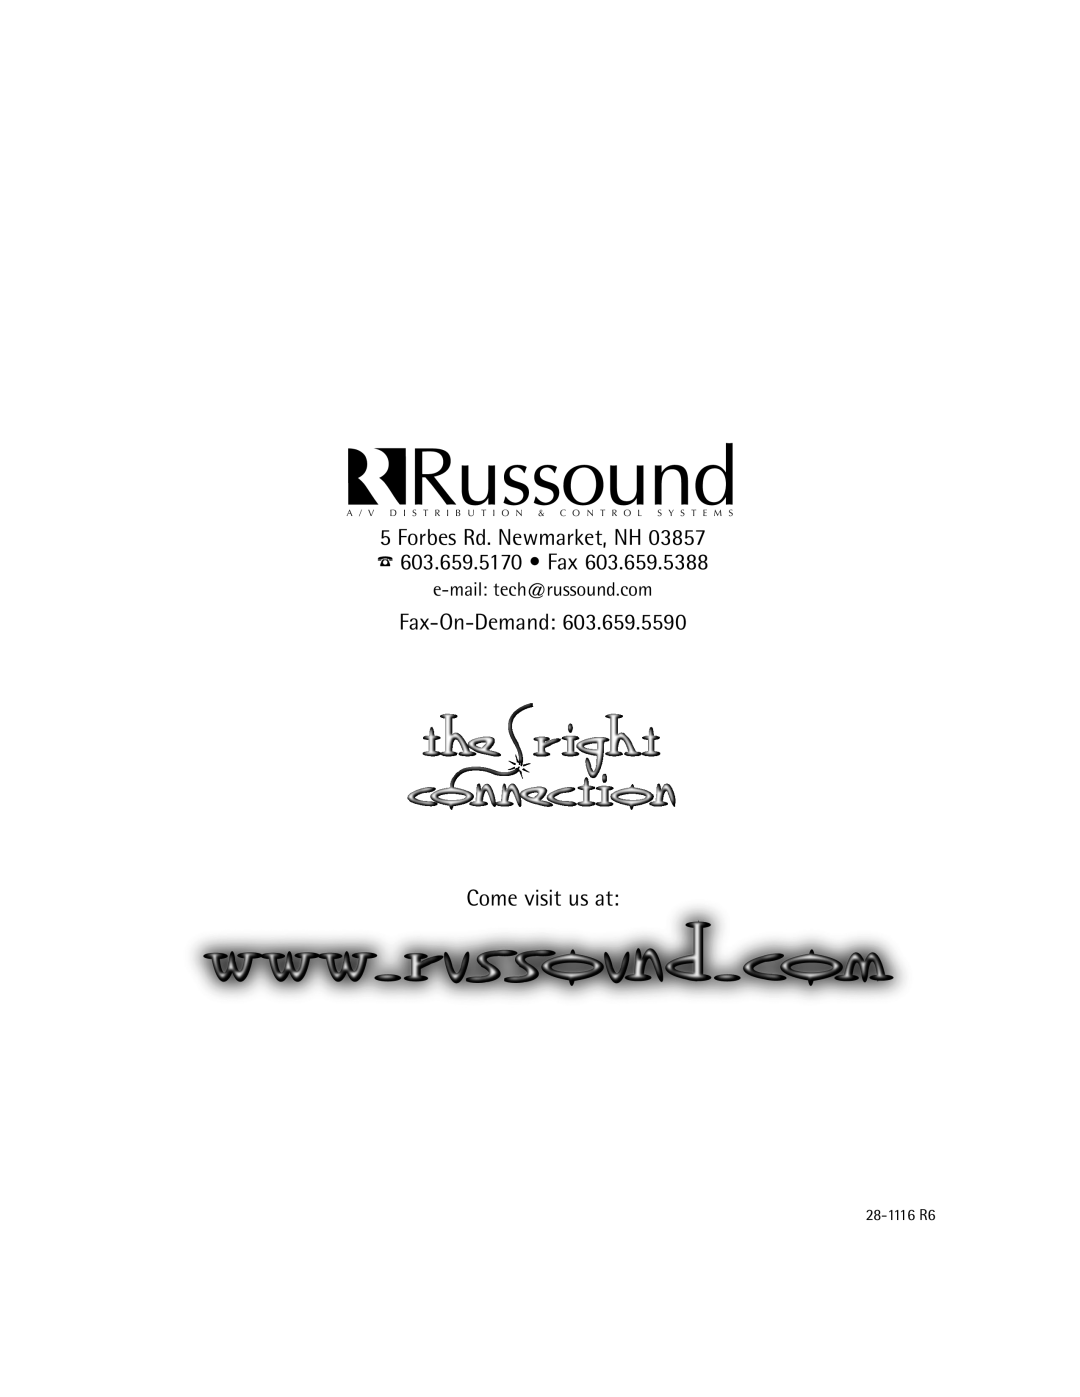 Russound CA-Series Forbes Rd. Newmarket, NH 603.659.5170 Fax, Fax-On-Demand 603.659.5590 Come visit us at 